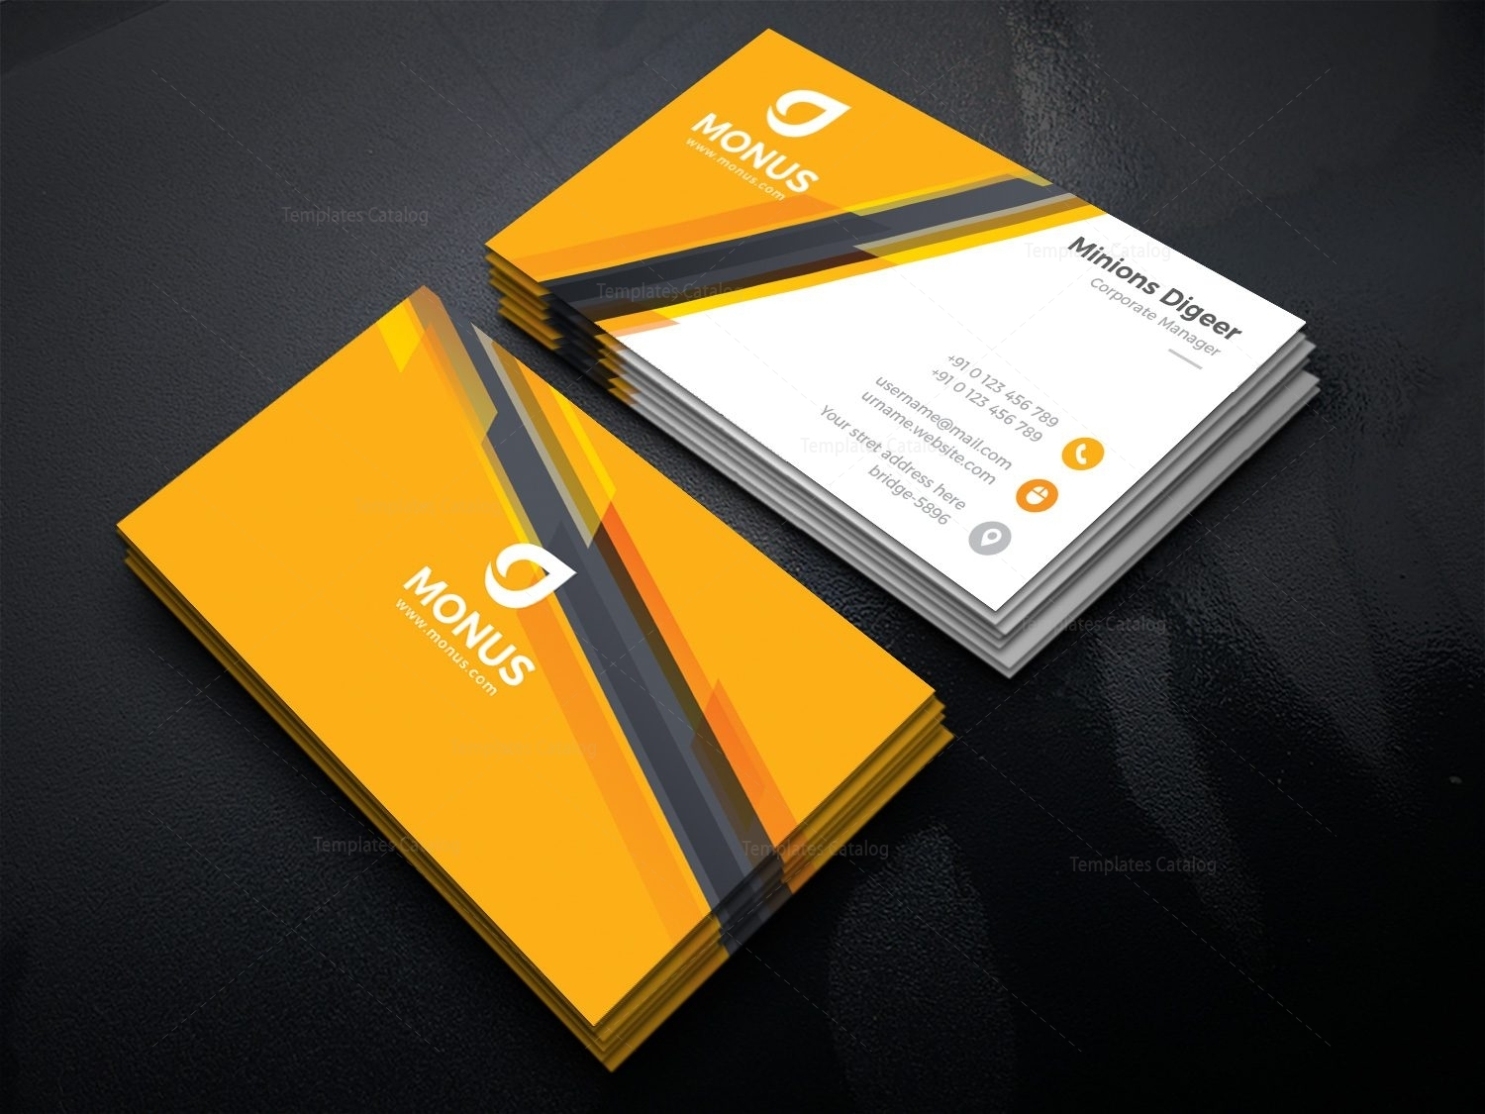 Awesome Corporate Business Card Design Template 001585 – Template Catalog For Company Business Cards Templates